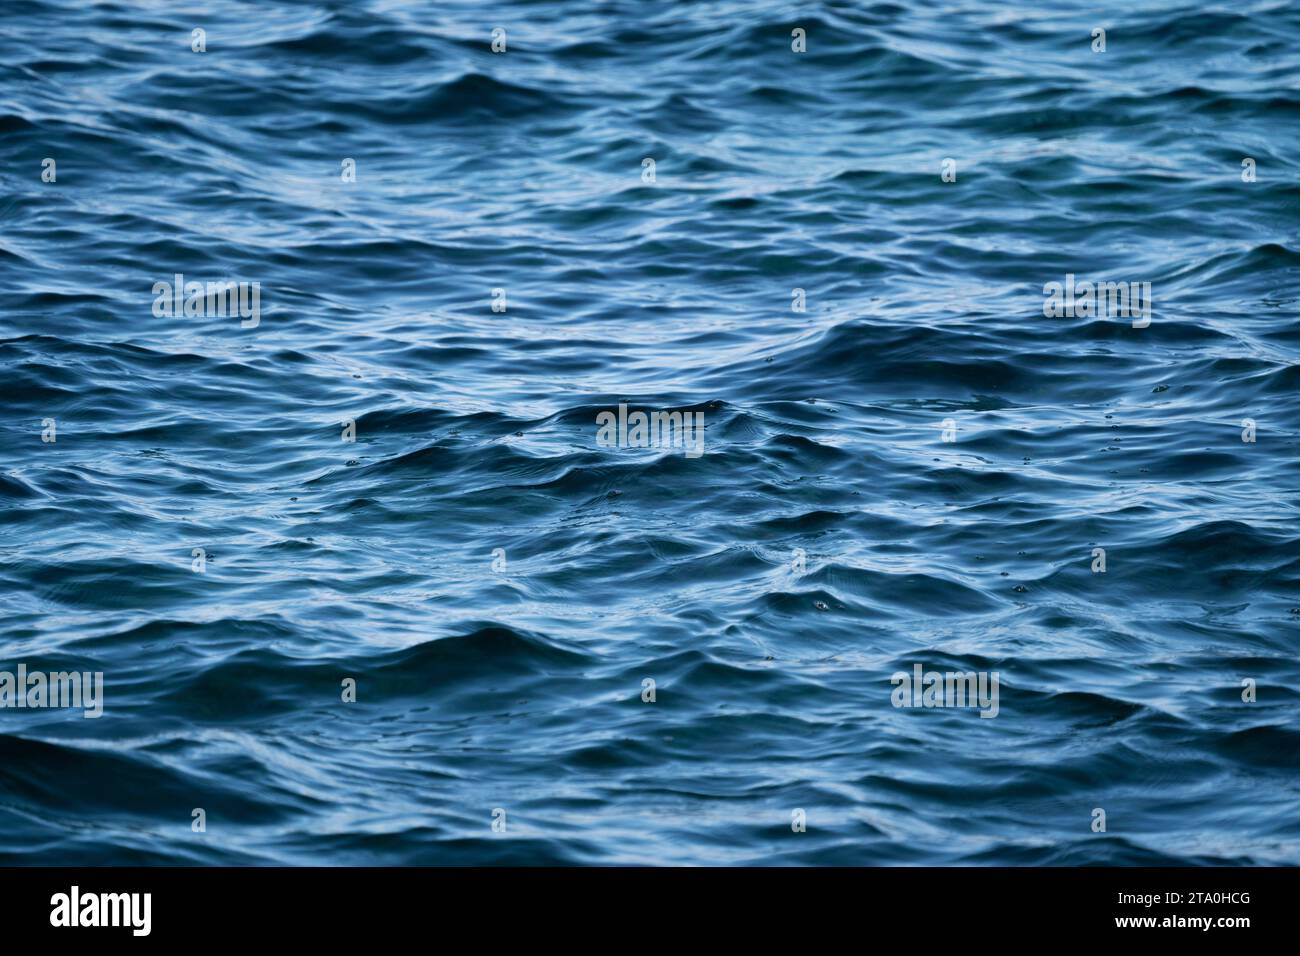 Blue Surface of the ocean. Agitated Ocean Sea Nature Background Texture Abstract Stock Photo